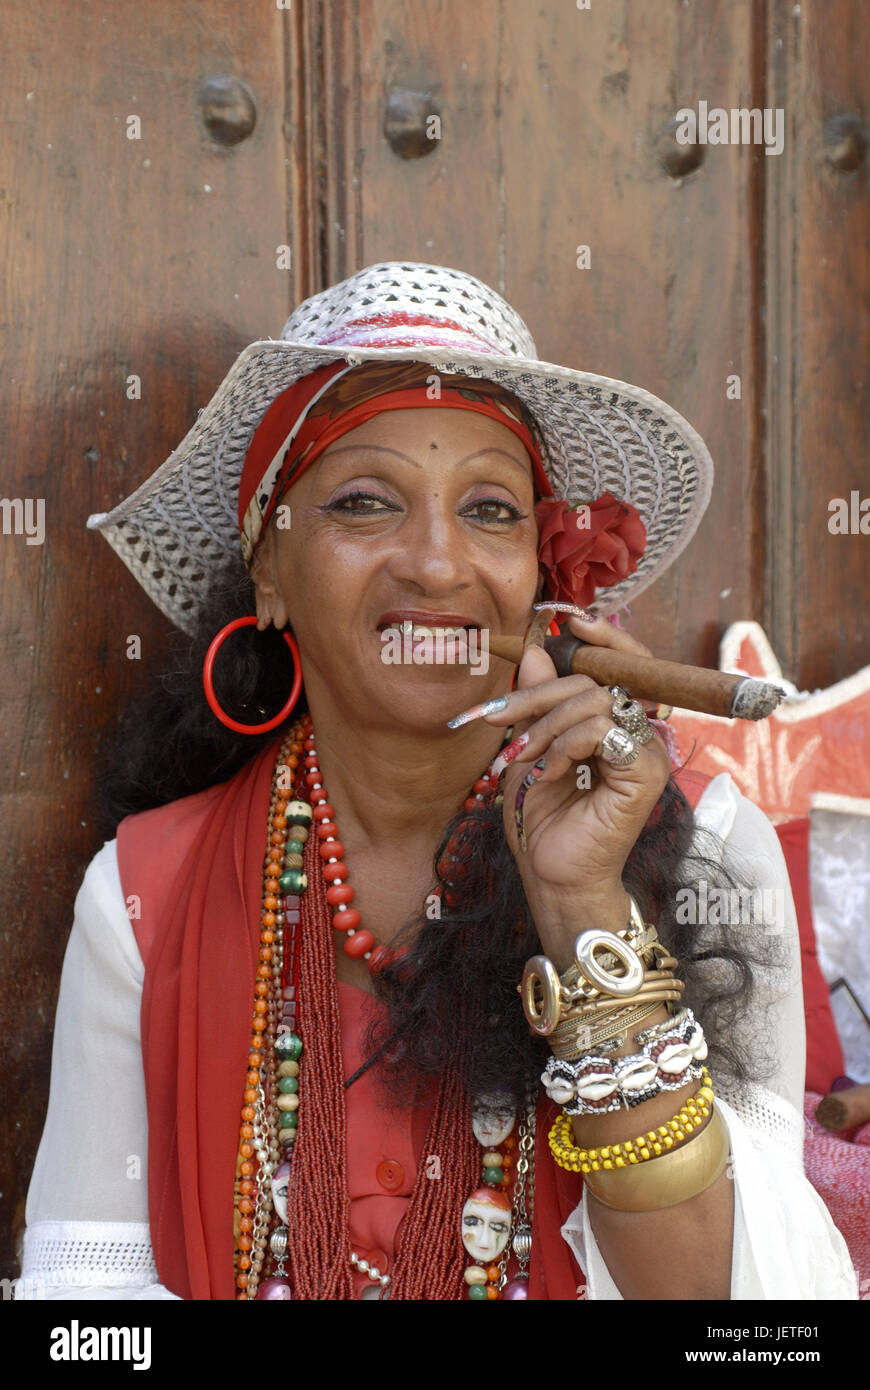 Cuba, Havana, Cuban, cigar, smoke, portrait, the Caribbean, island, person, locals, woman, care, solar hat, headgear, jewellery, necklaces, arm catenas, bangles, cigar smoker, lifestyle, satisfaction, smoker, icon, luxury, tobacco products, consumption, mania, nicotine mania, nicotine, unhealthily, health risk, cancer danger, harmful, outside, life setting, health, Stock Photo